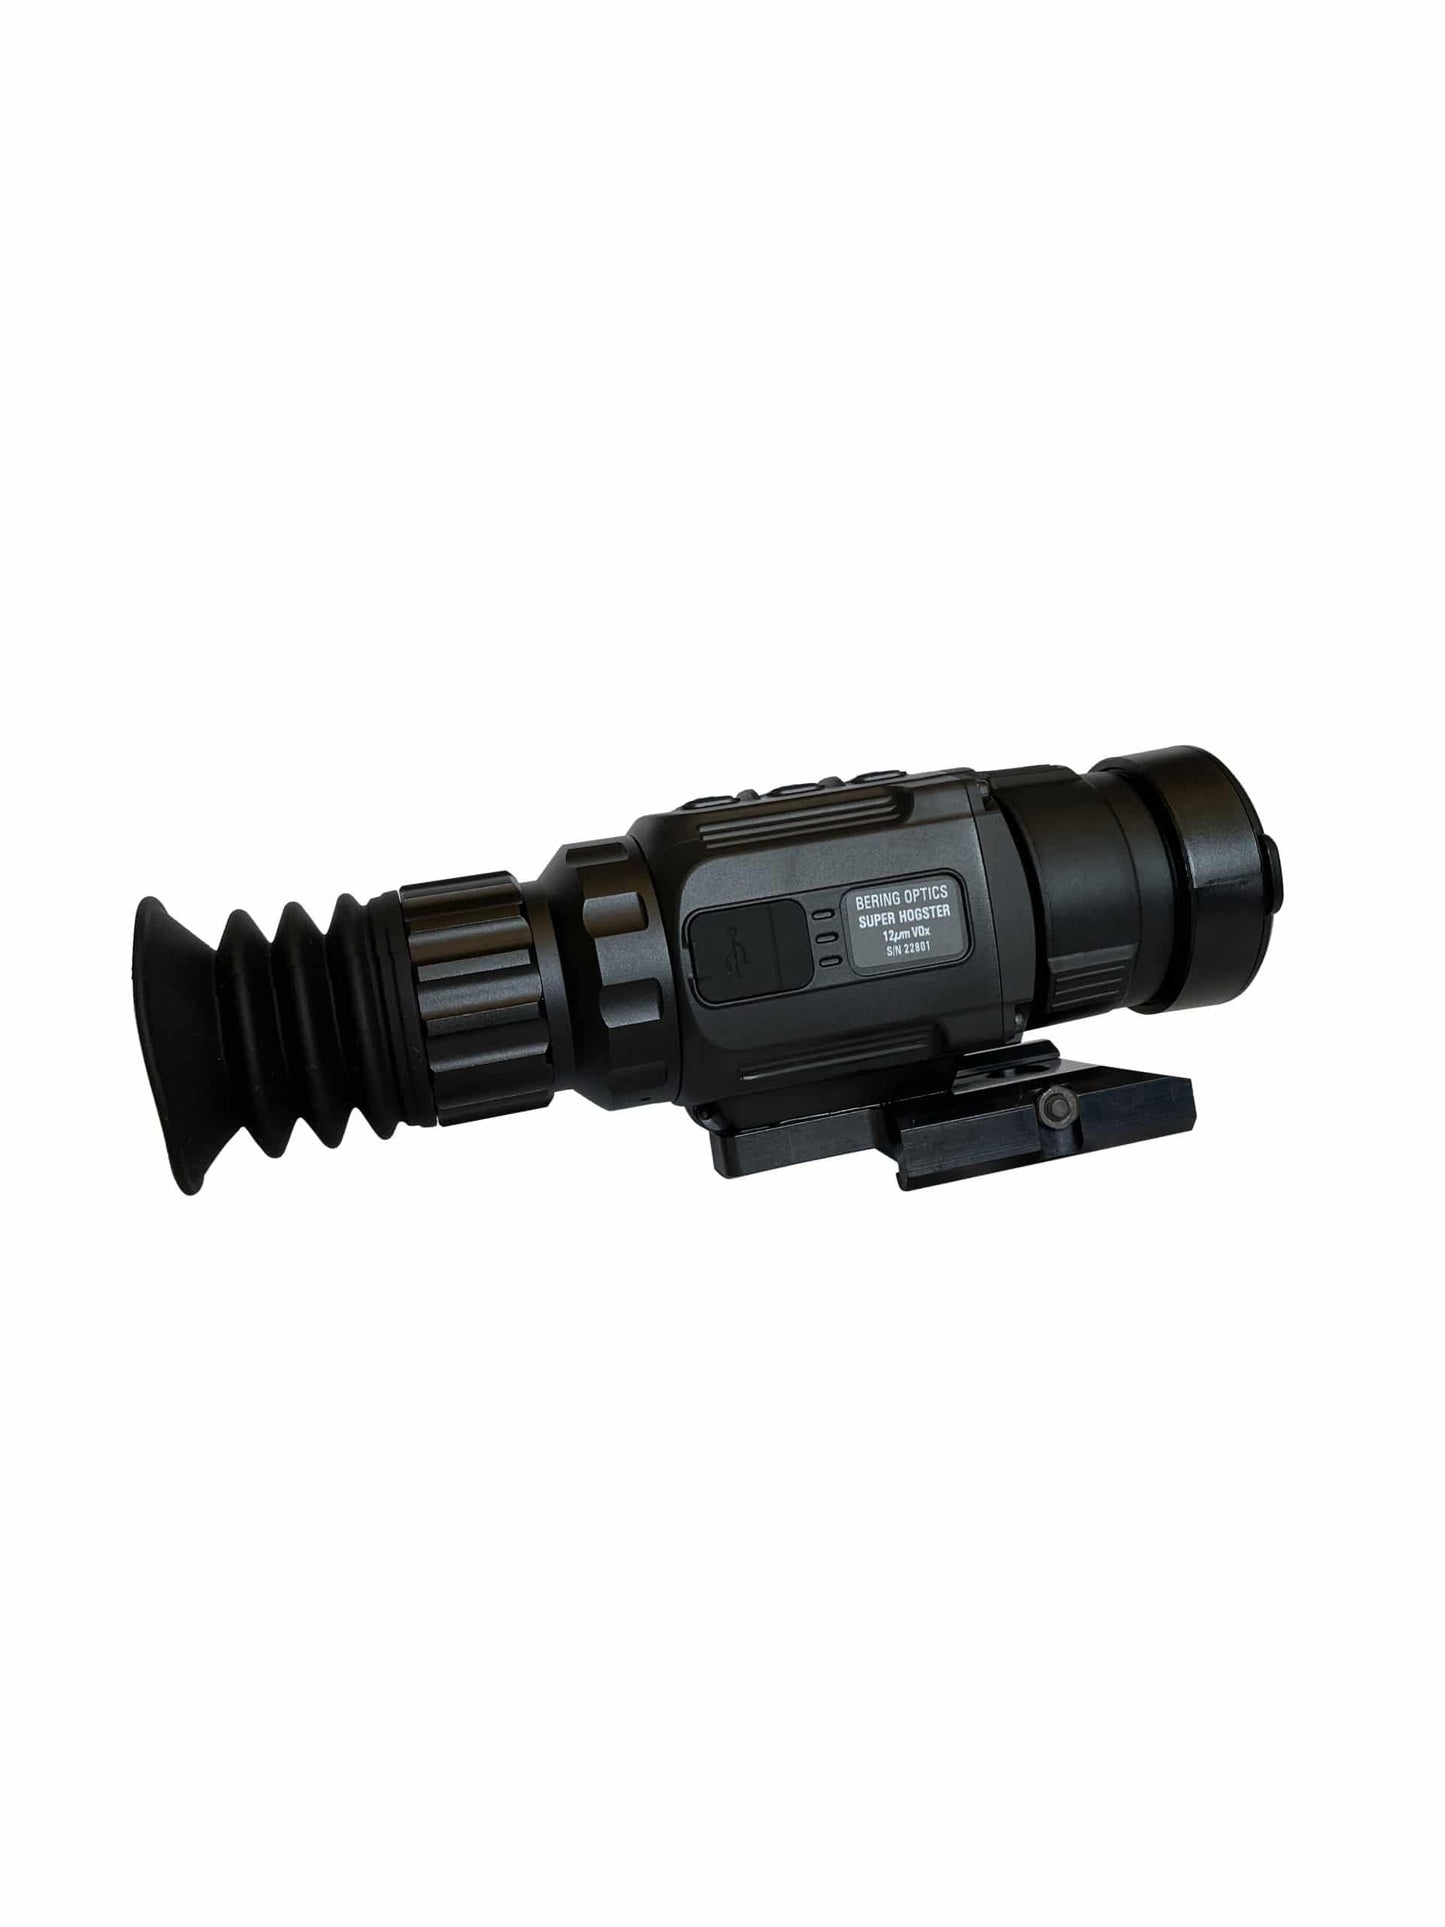 Bering Super Hogster A3 Thermal Rifle Scope